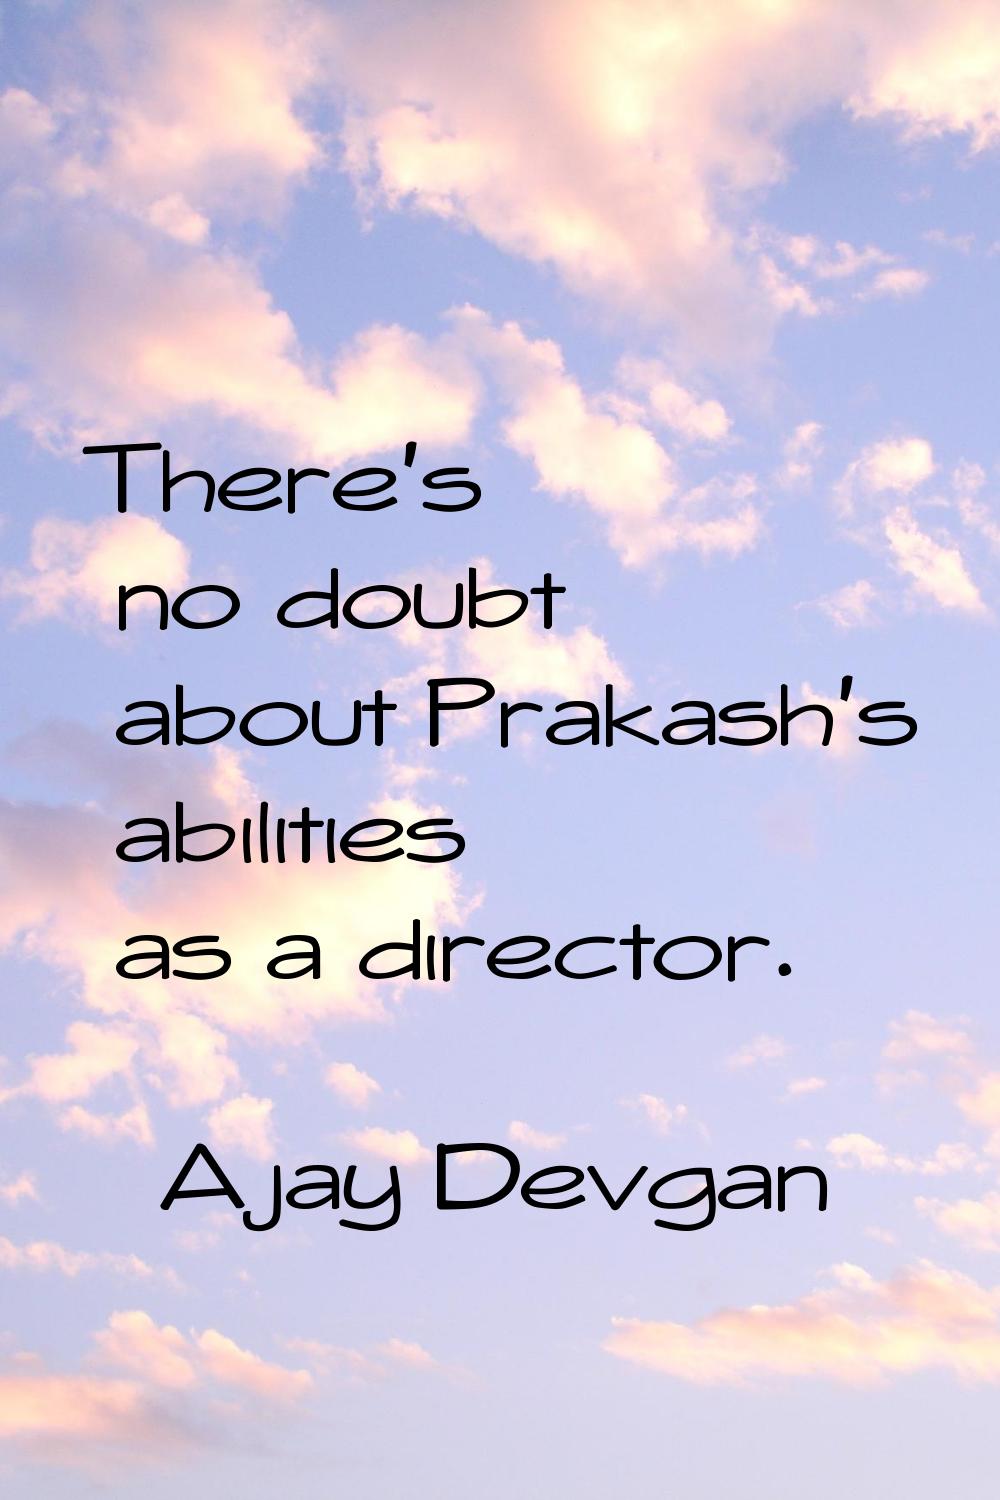 There's no doubt about Prakash's abilities as a director.